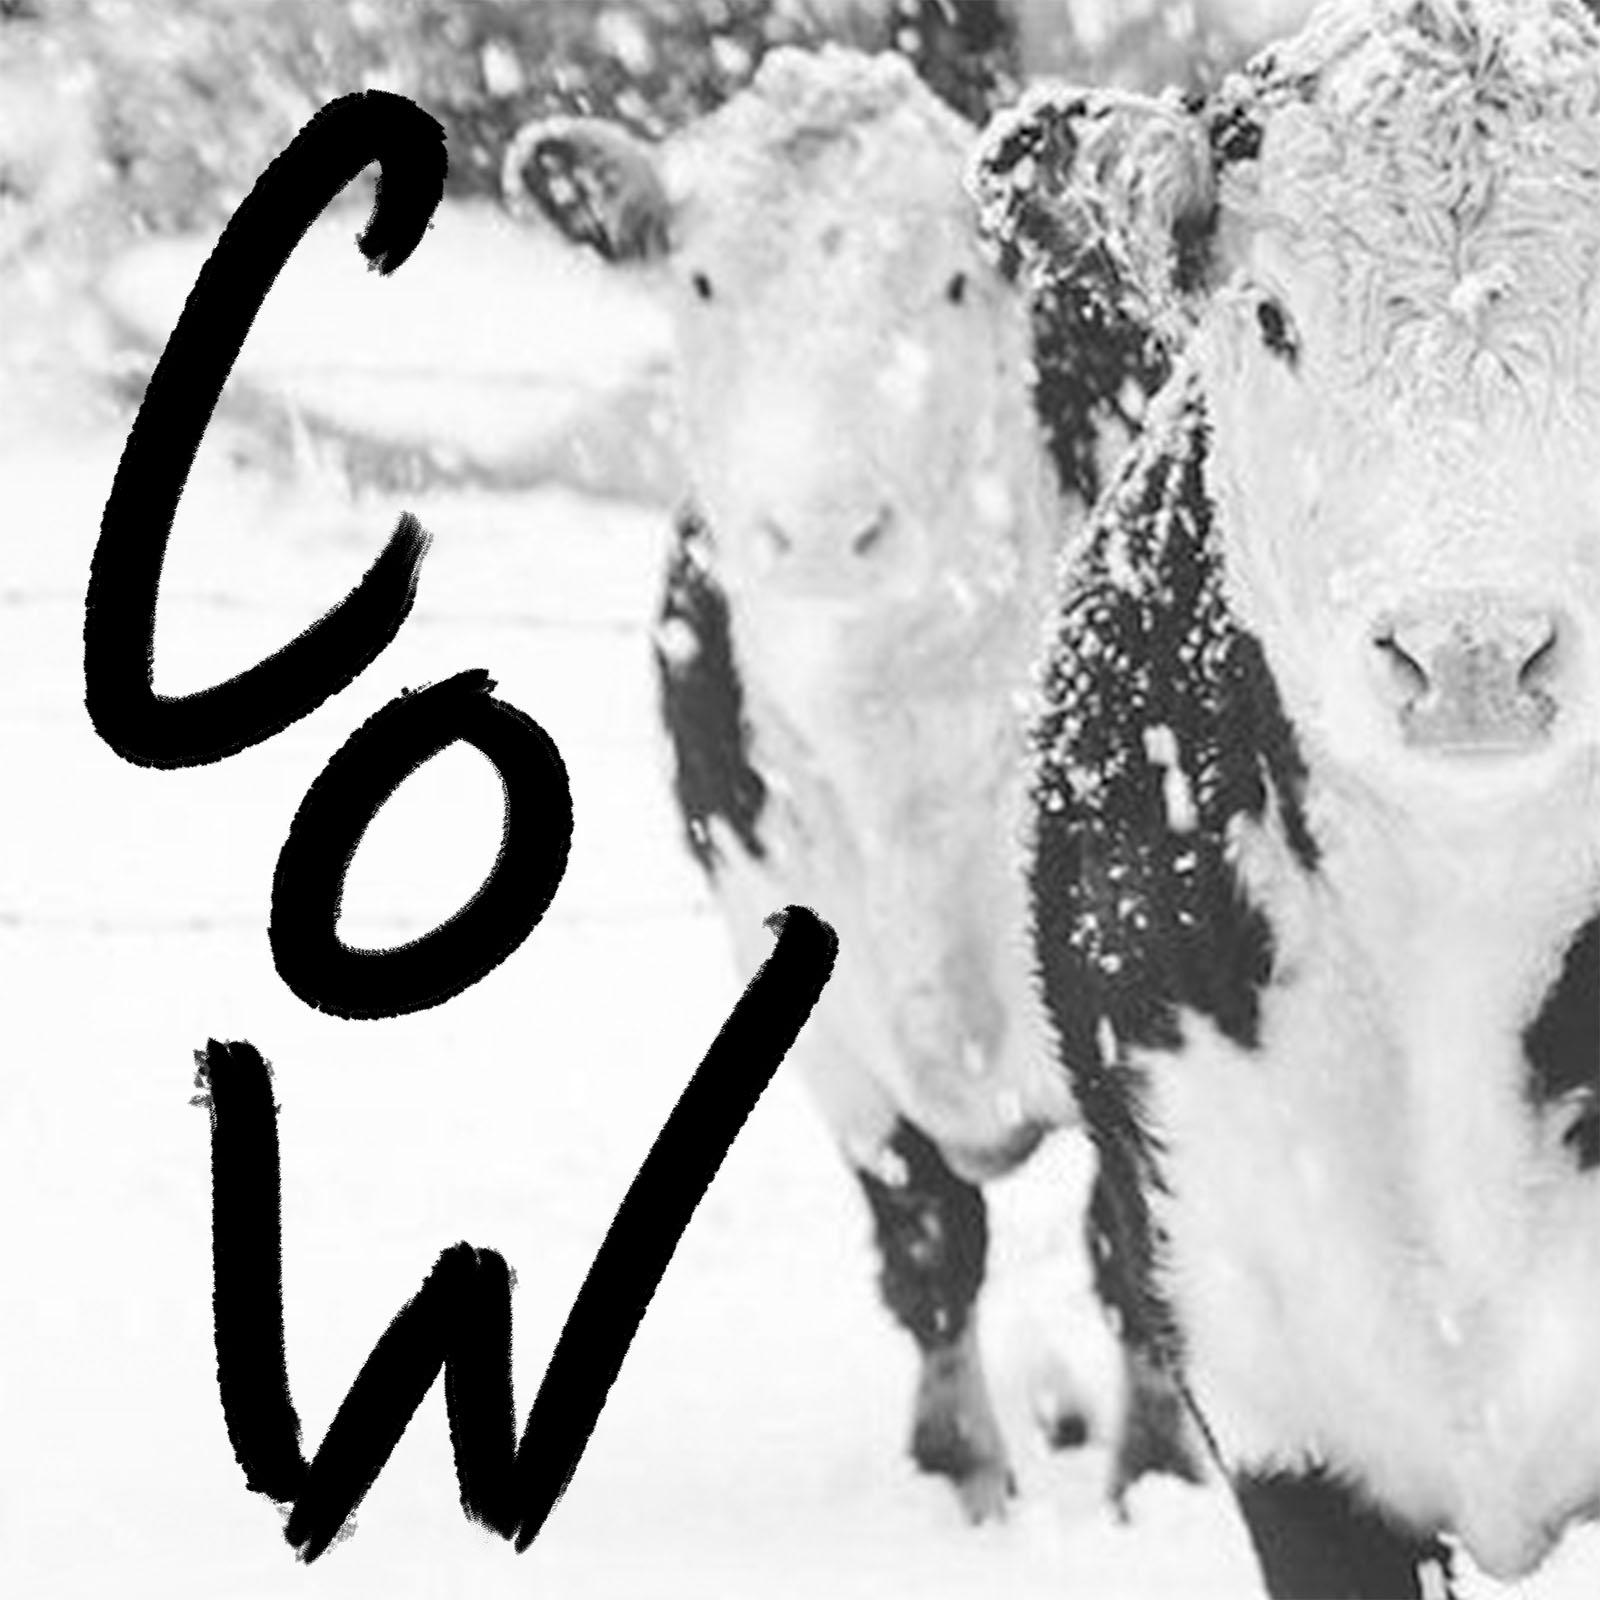 some cows in the snow and the word "cow" written with a felt tip pen